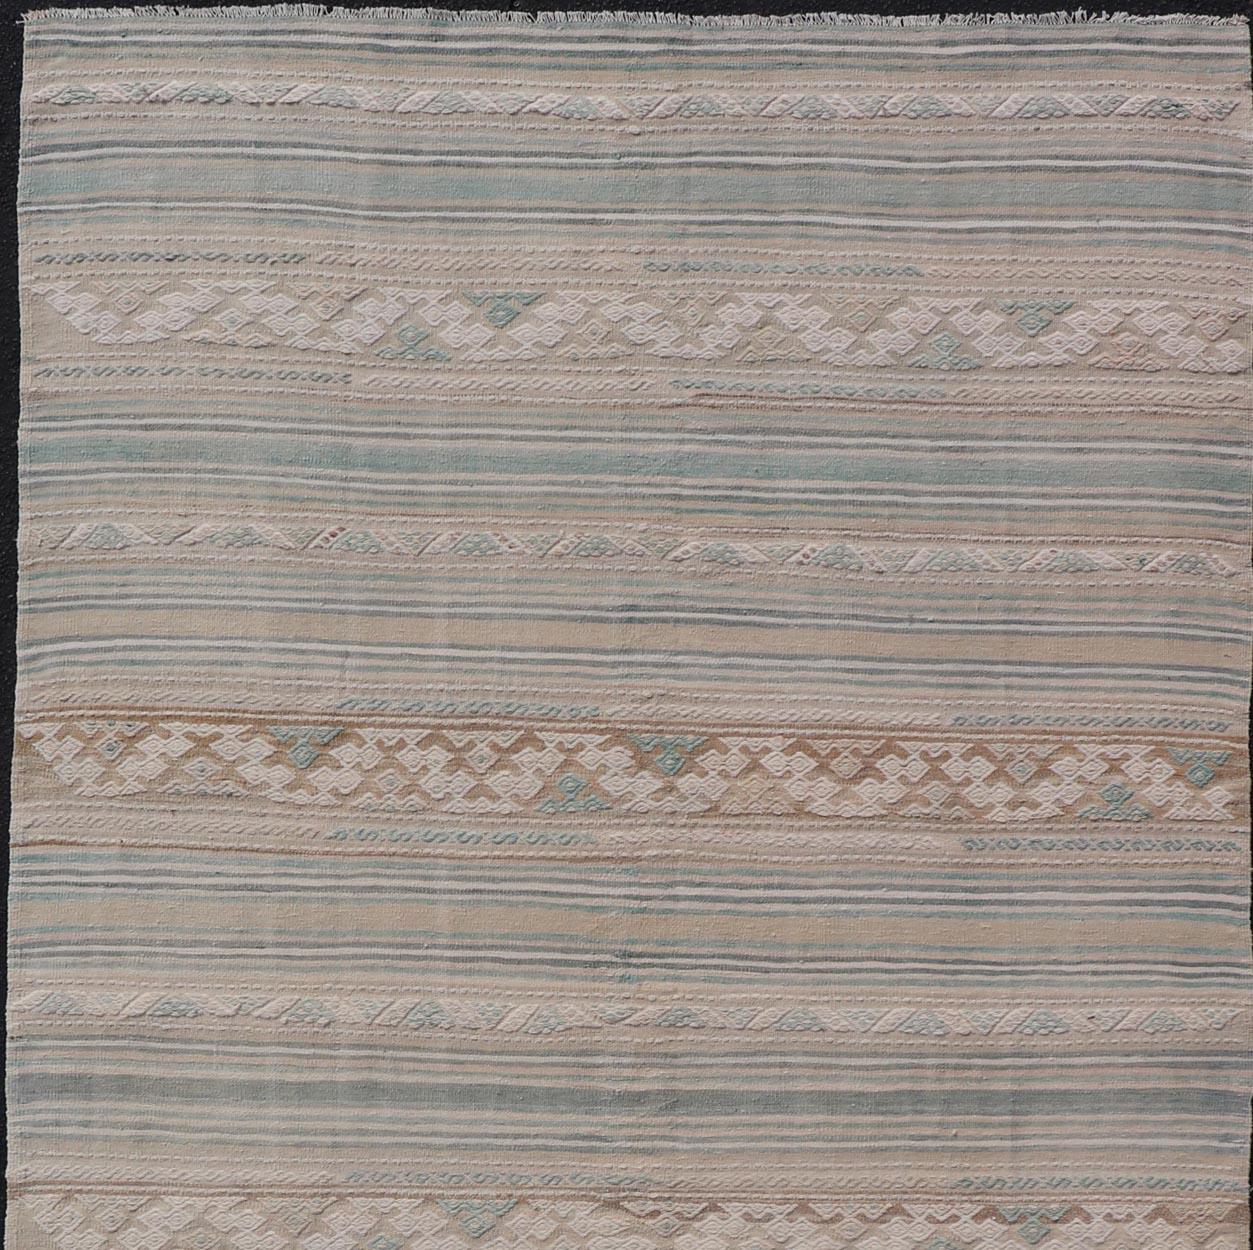 Turkish Gallery Flat-Weave Kilim in Muted Colors with Stripes and Embroideries For Sale 2